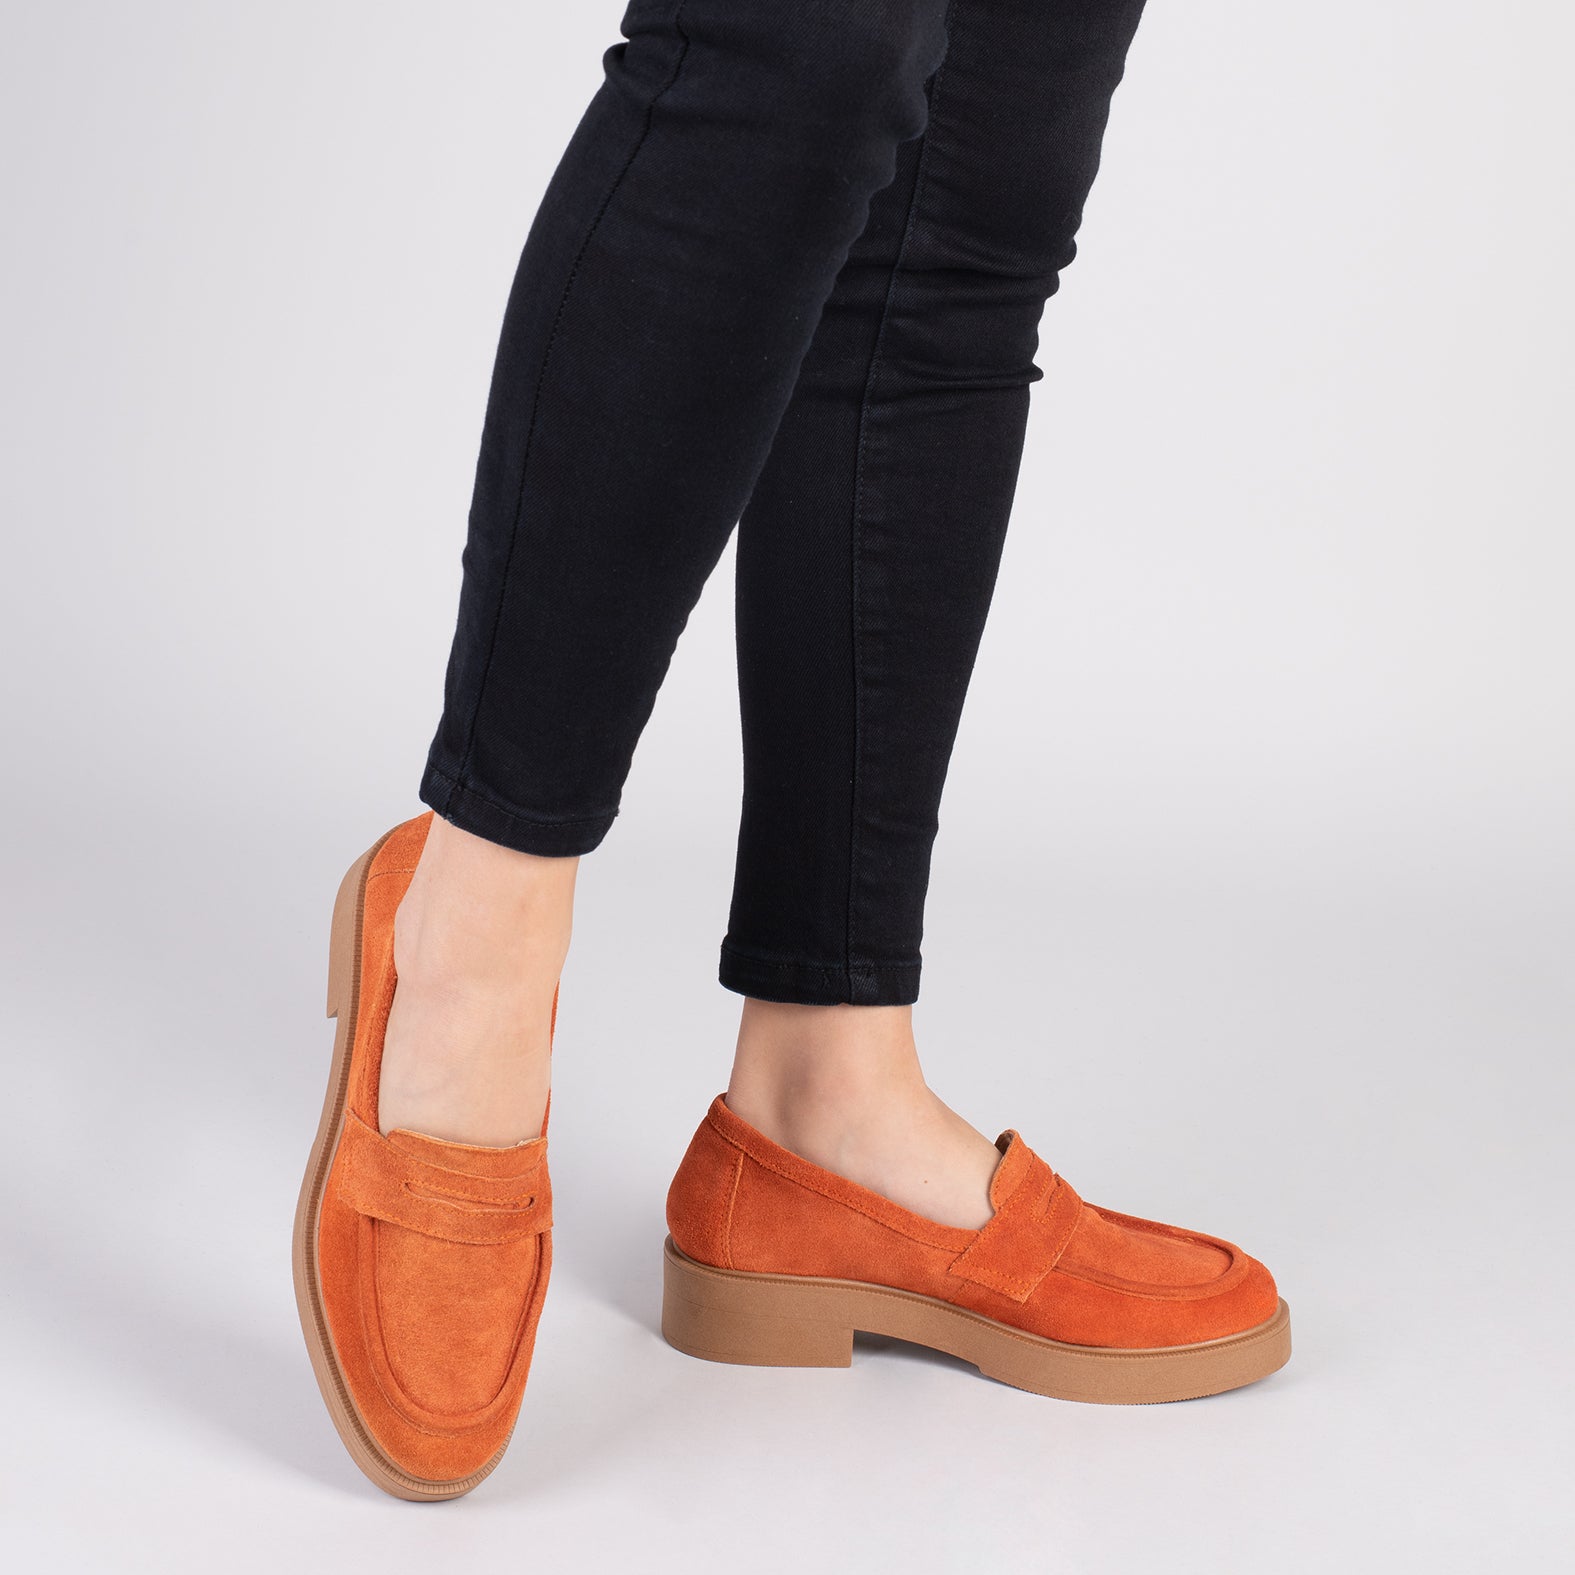 CASUAL – ORANGE classic moccasins with mask